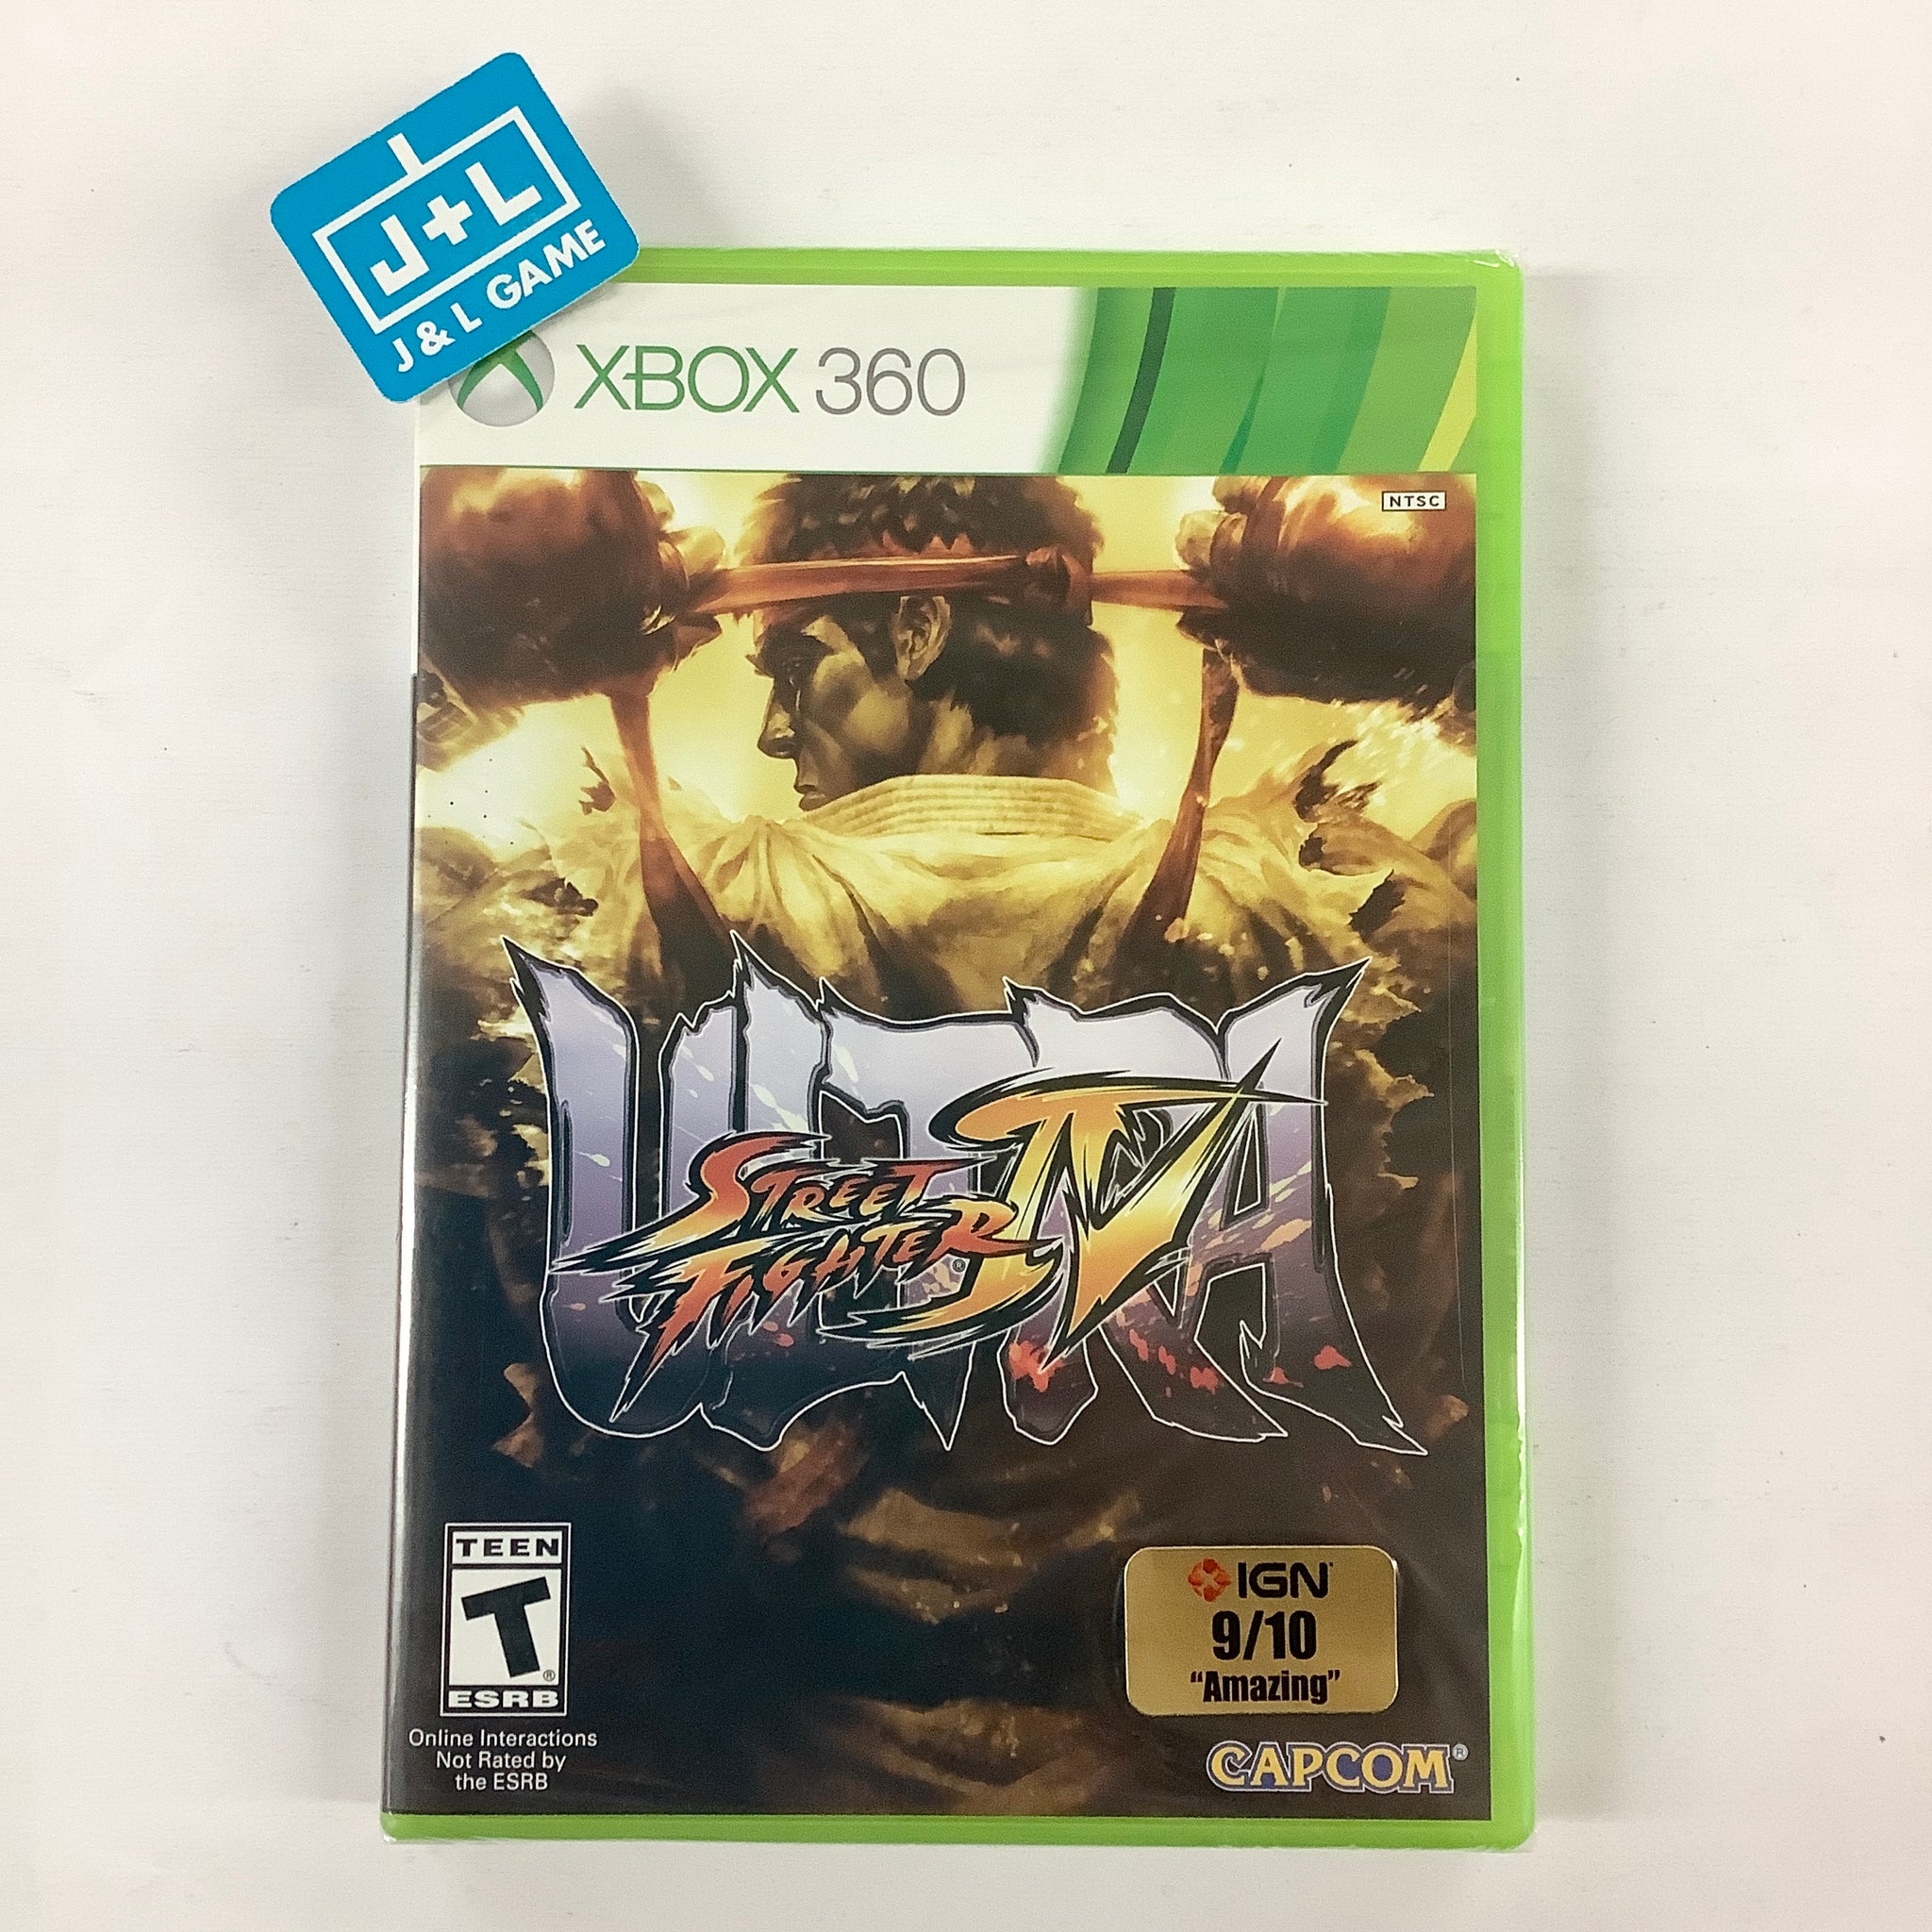 Ultra Street Fighter IV (Japanese & English) for Xbox360, street